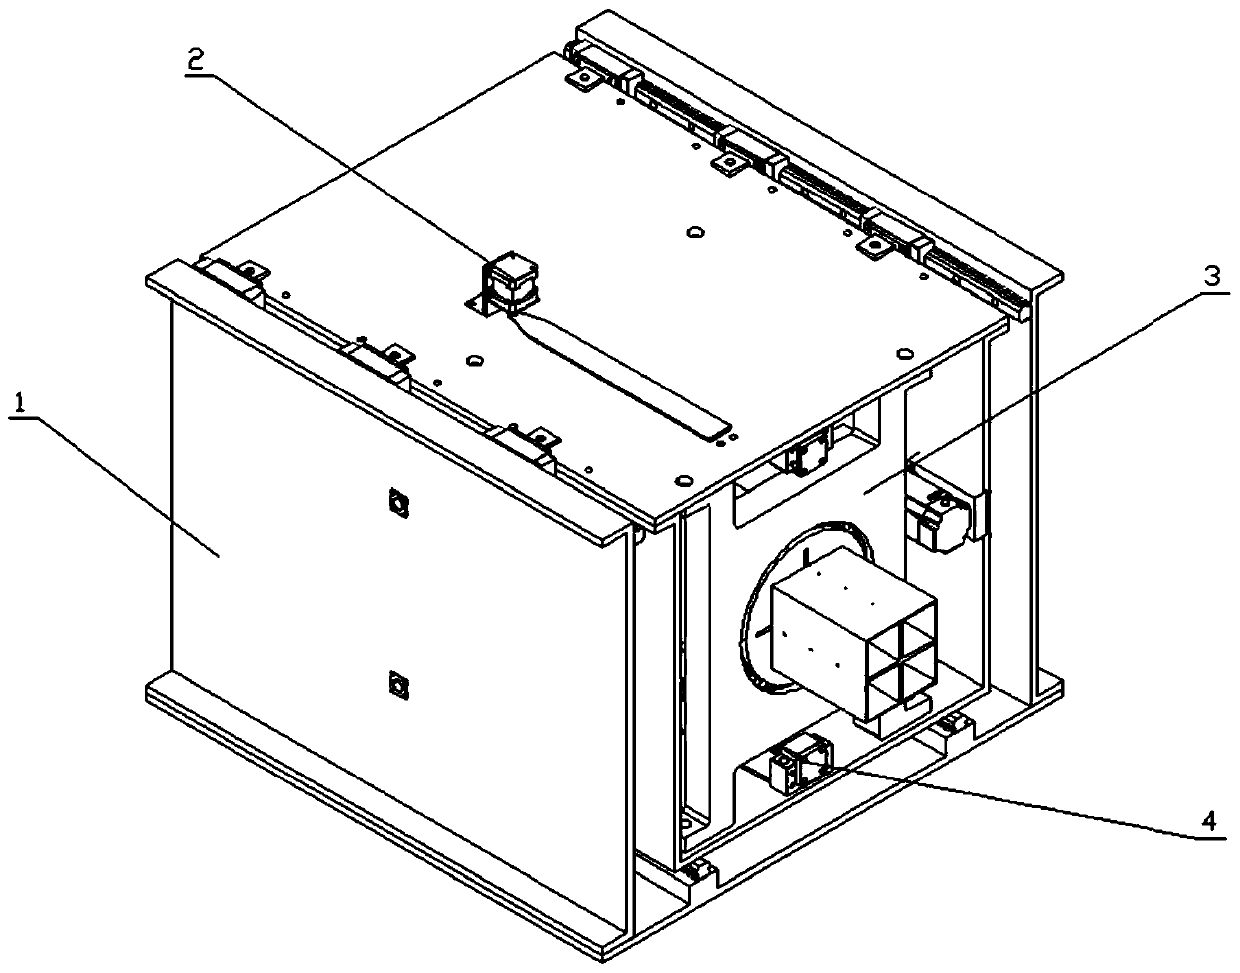 A strip cap rotary packaging device